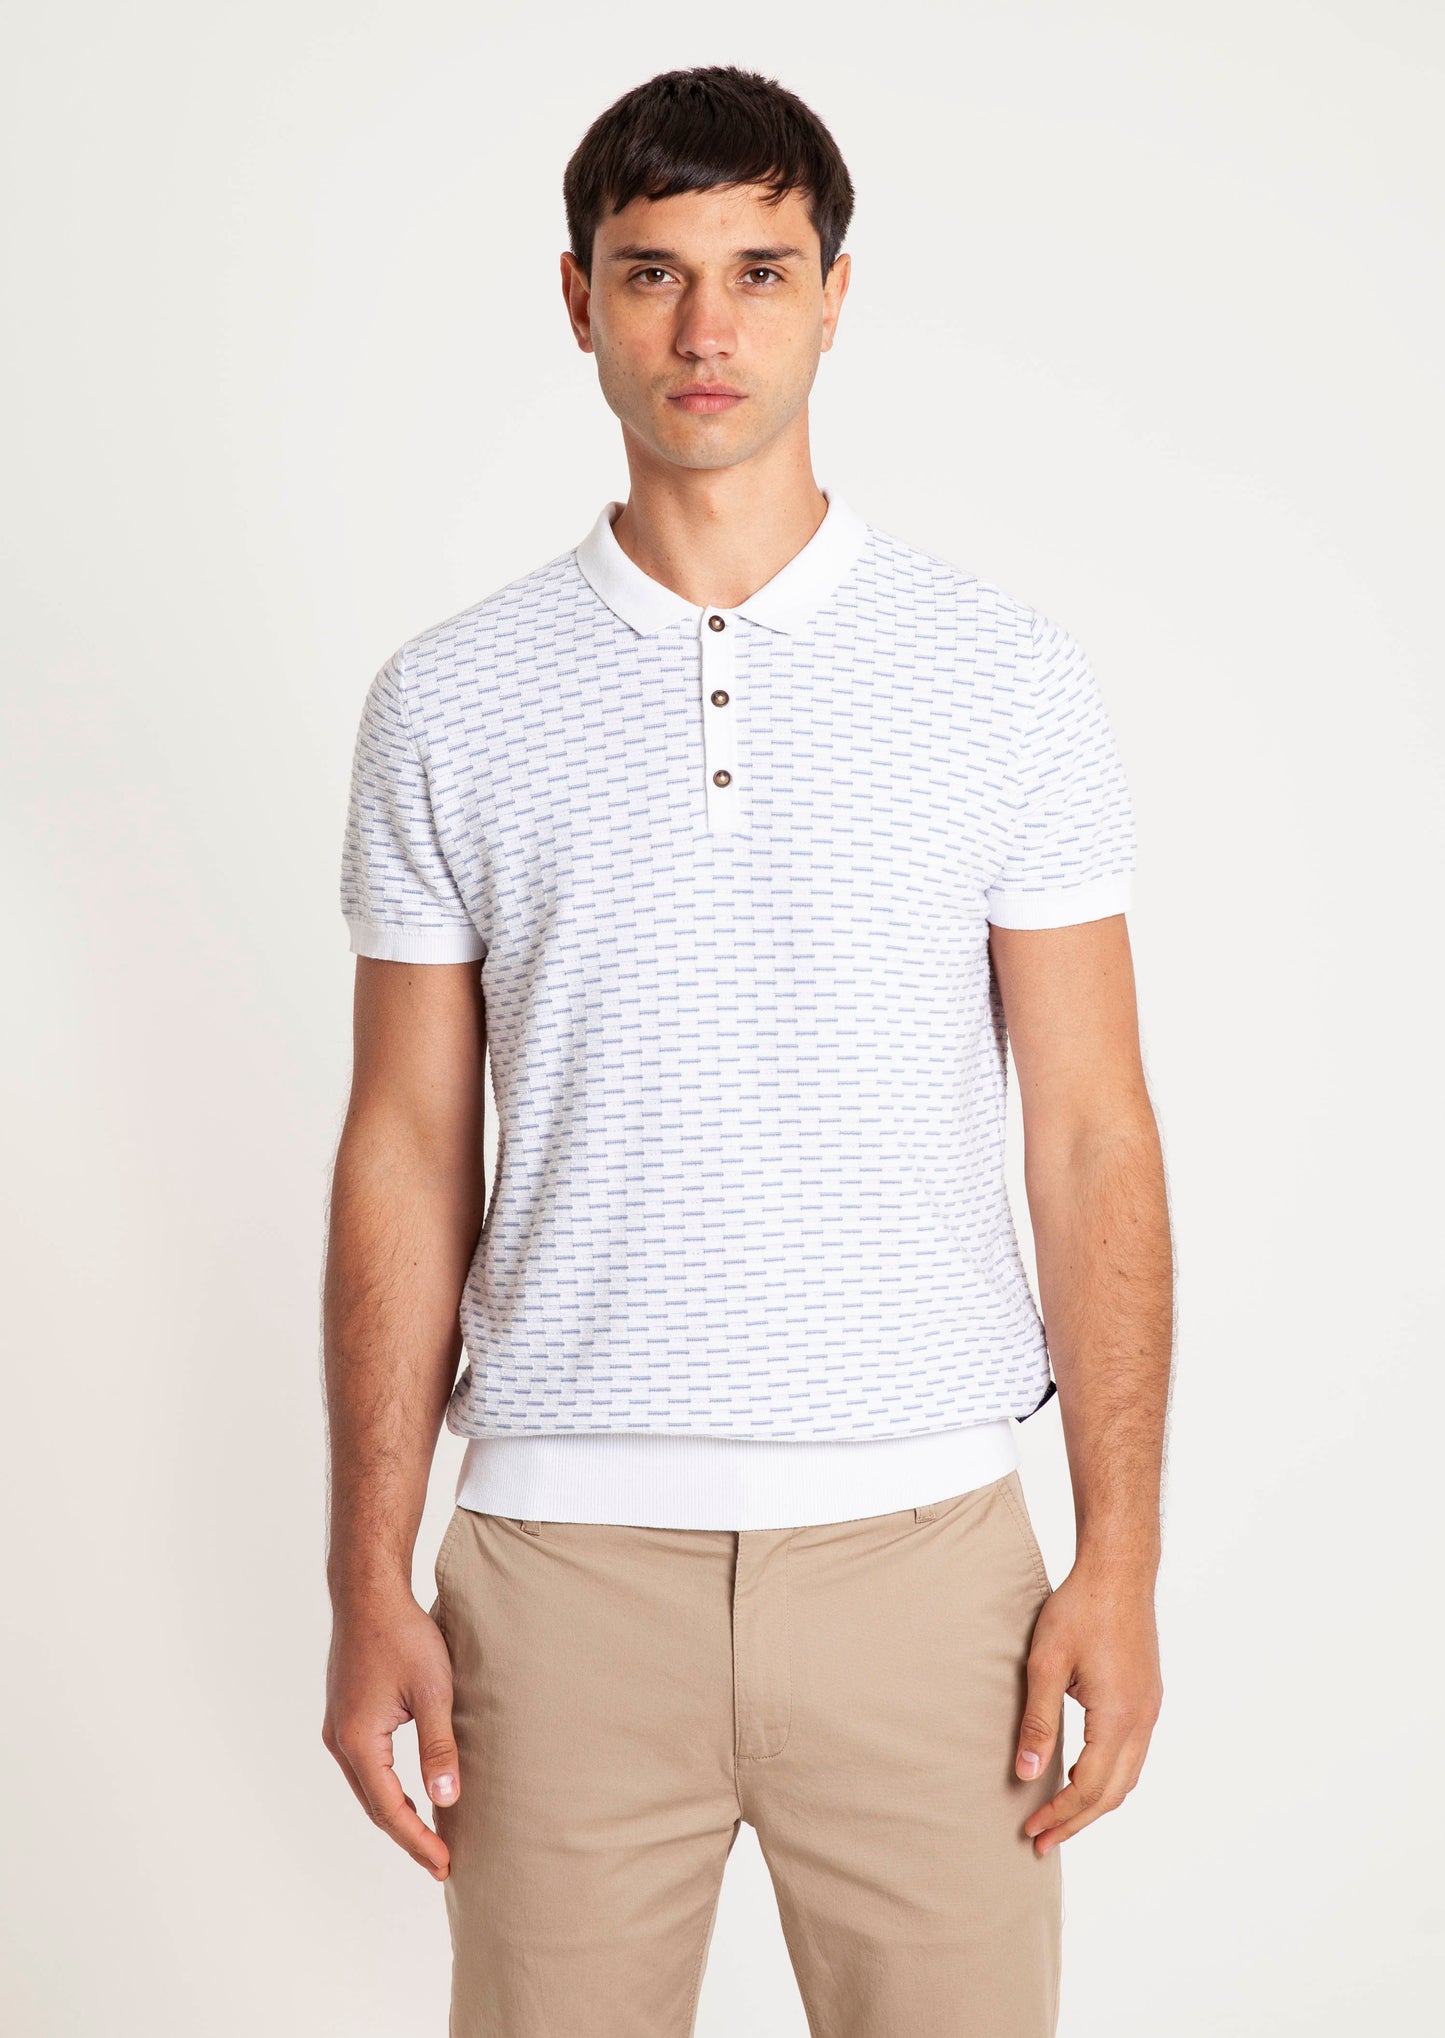 Knitted Jacquard Polo - White